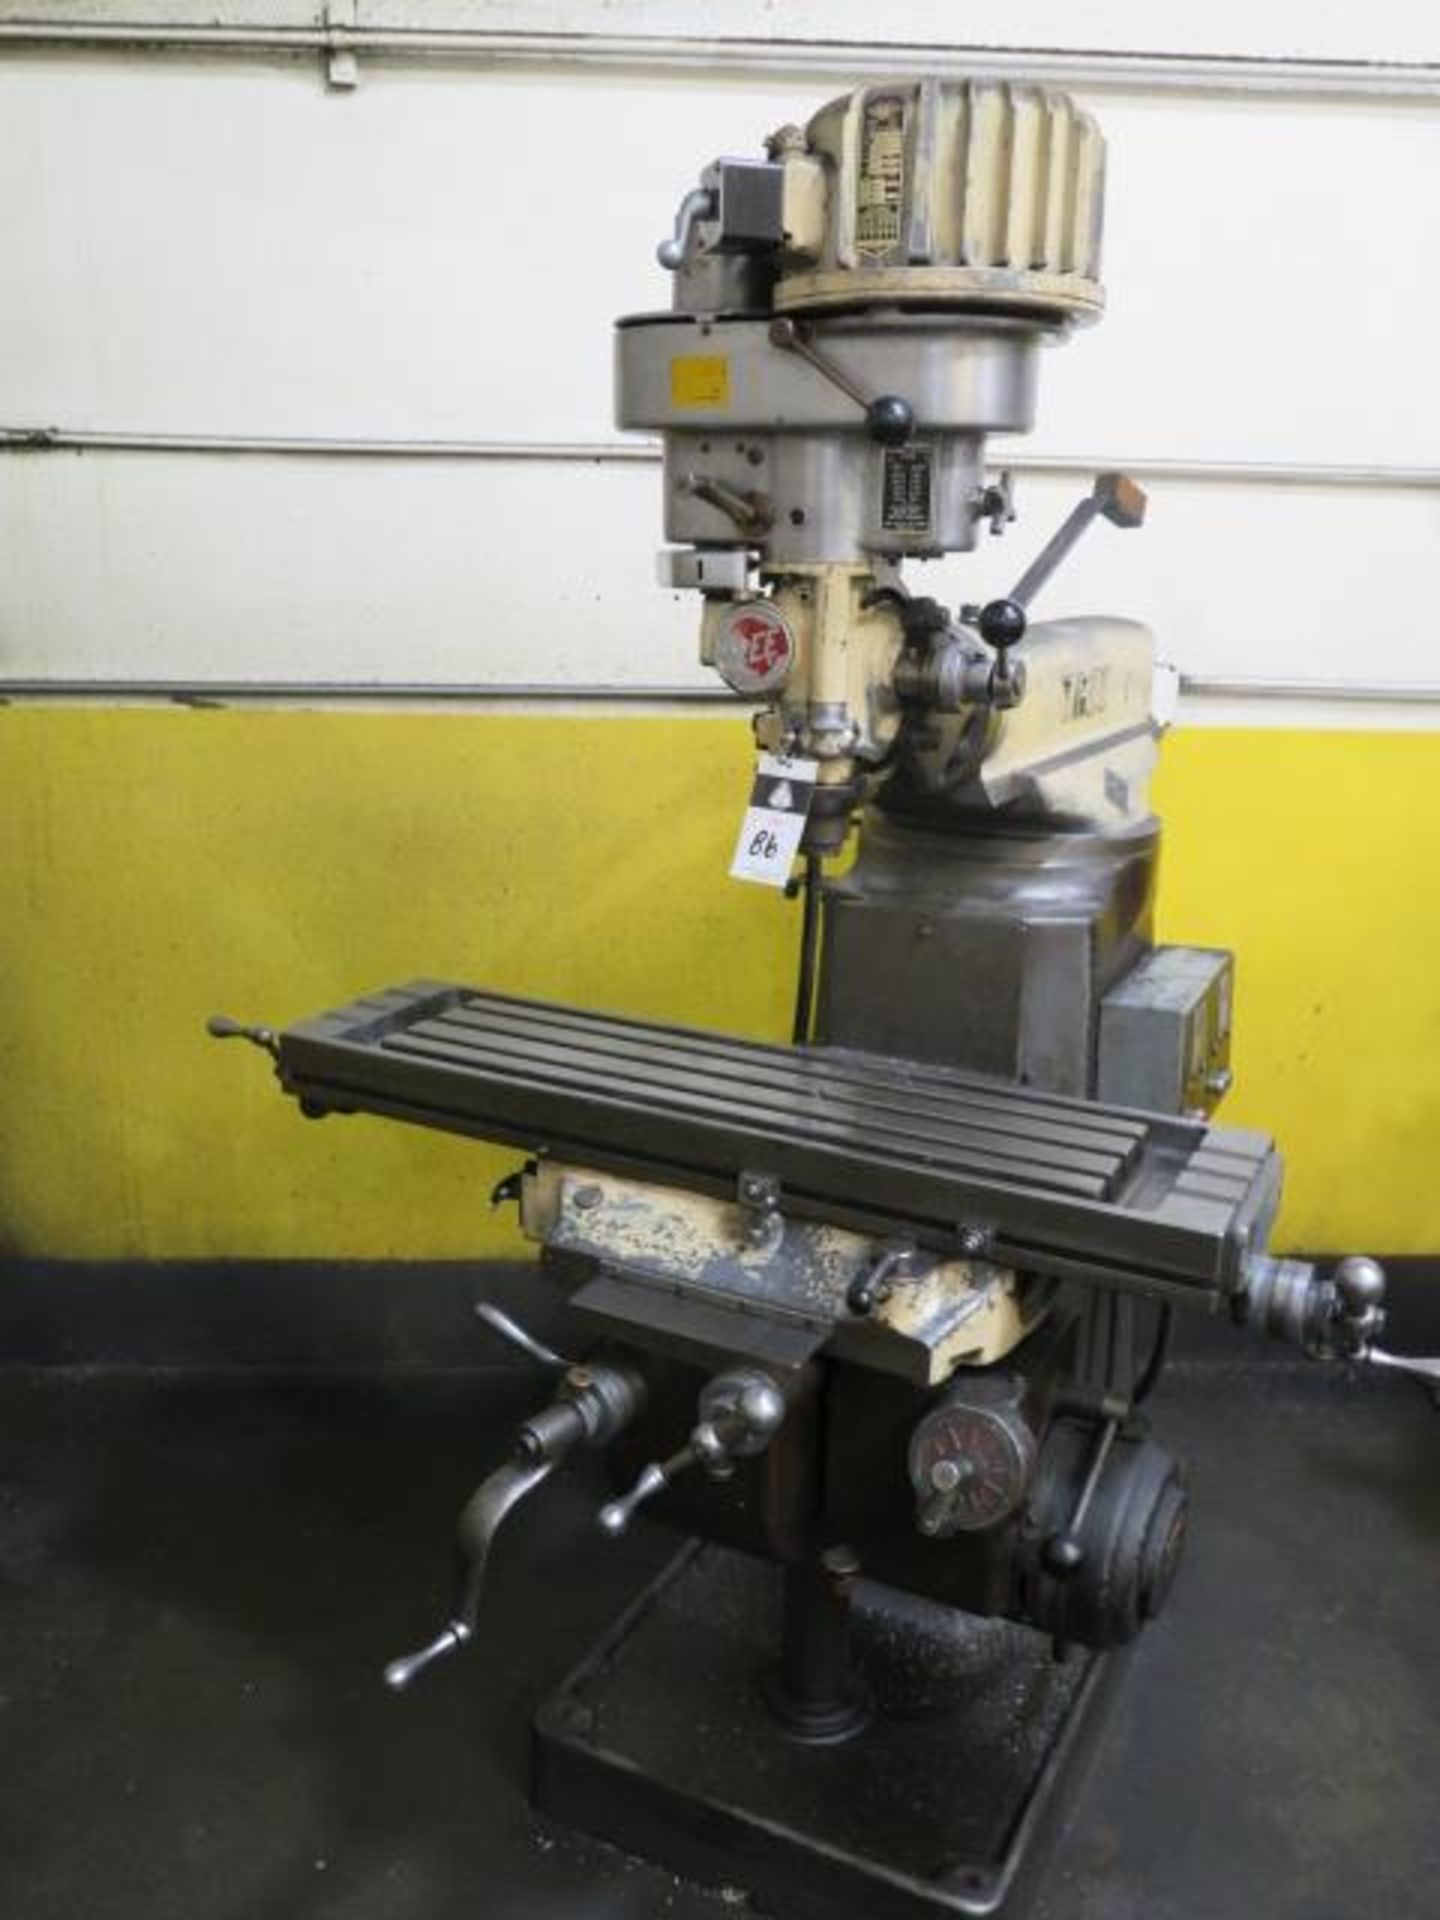 Tree 2UVR Vertical Mill s/n 7369 w/ 60-3300 RPM, Colleted Spindle, PF, 10 ½” x 42” Table, SOLD AS IS